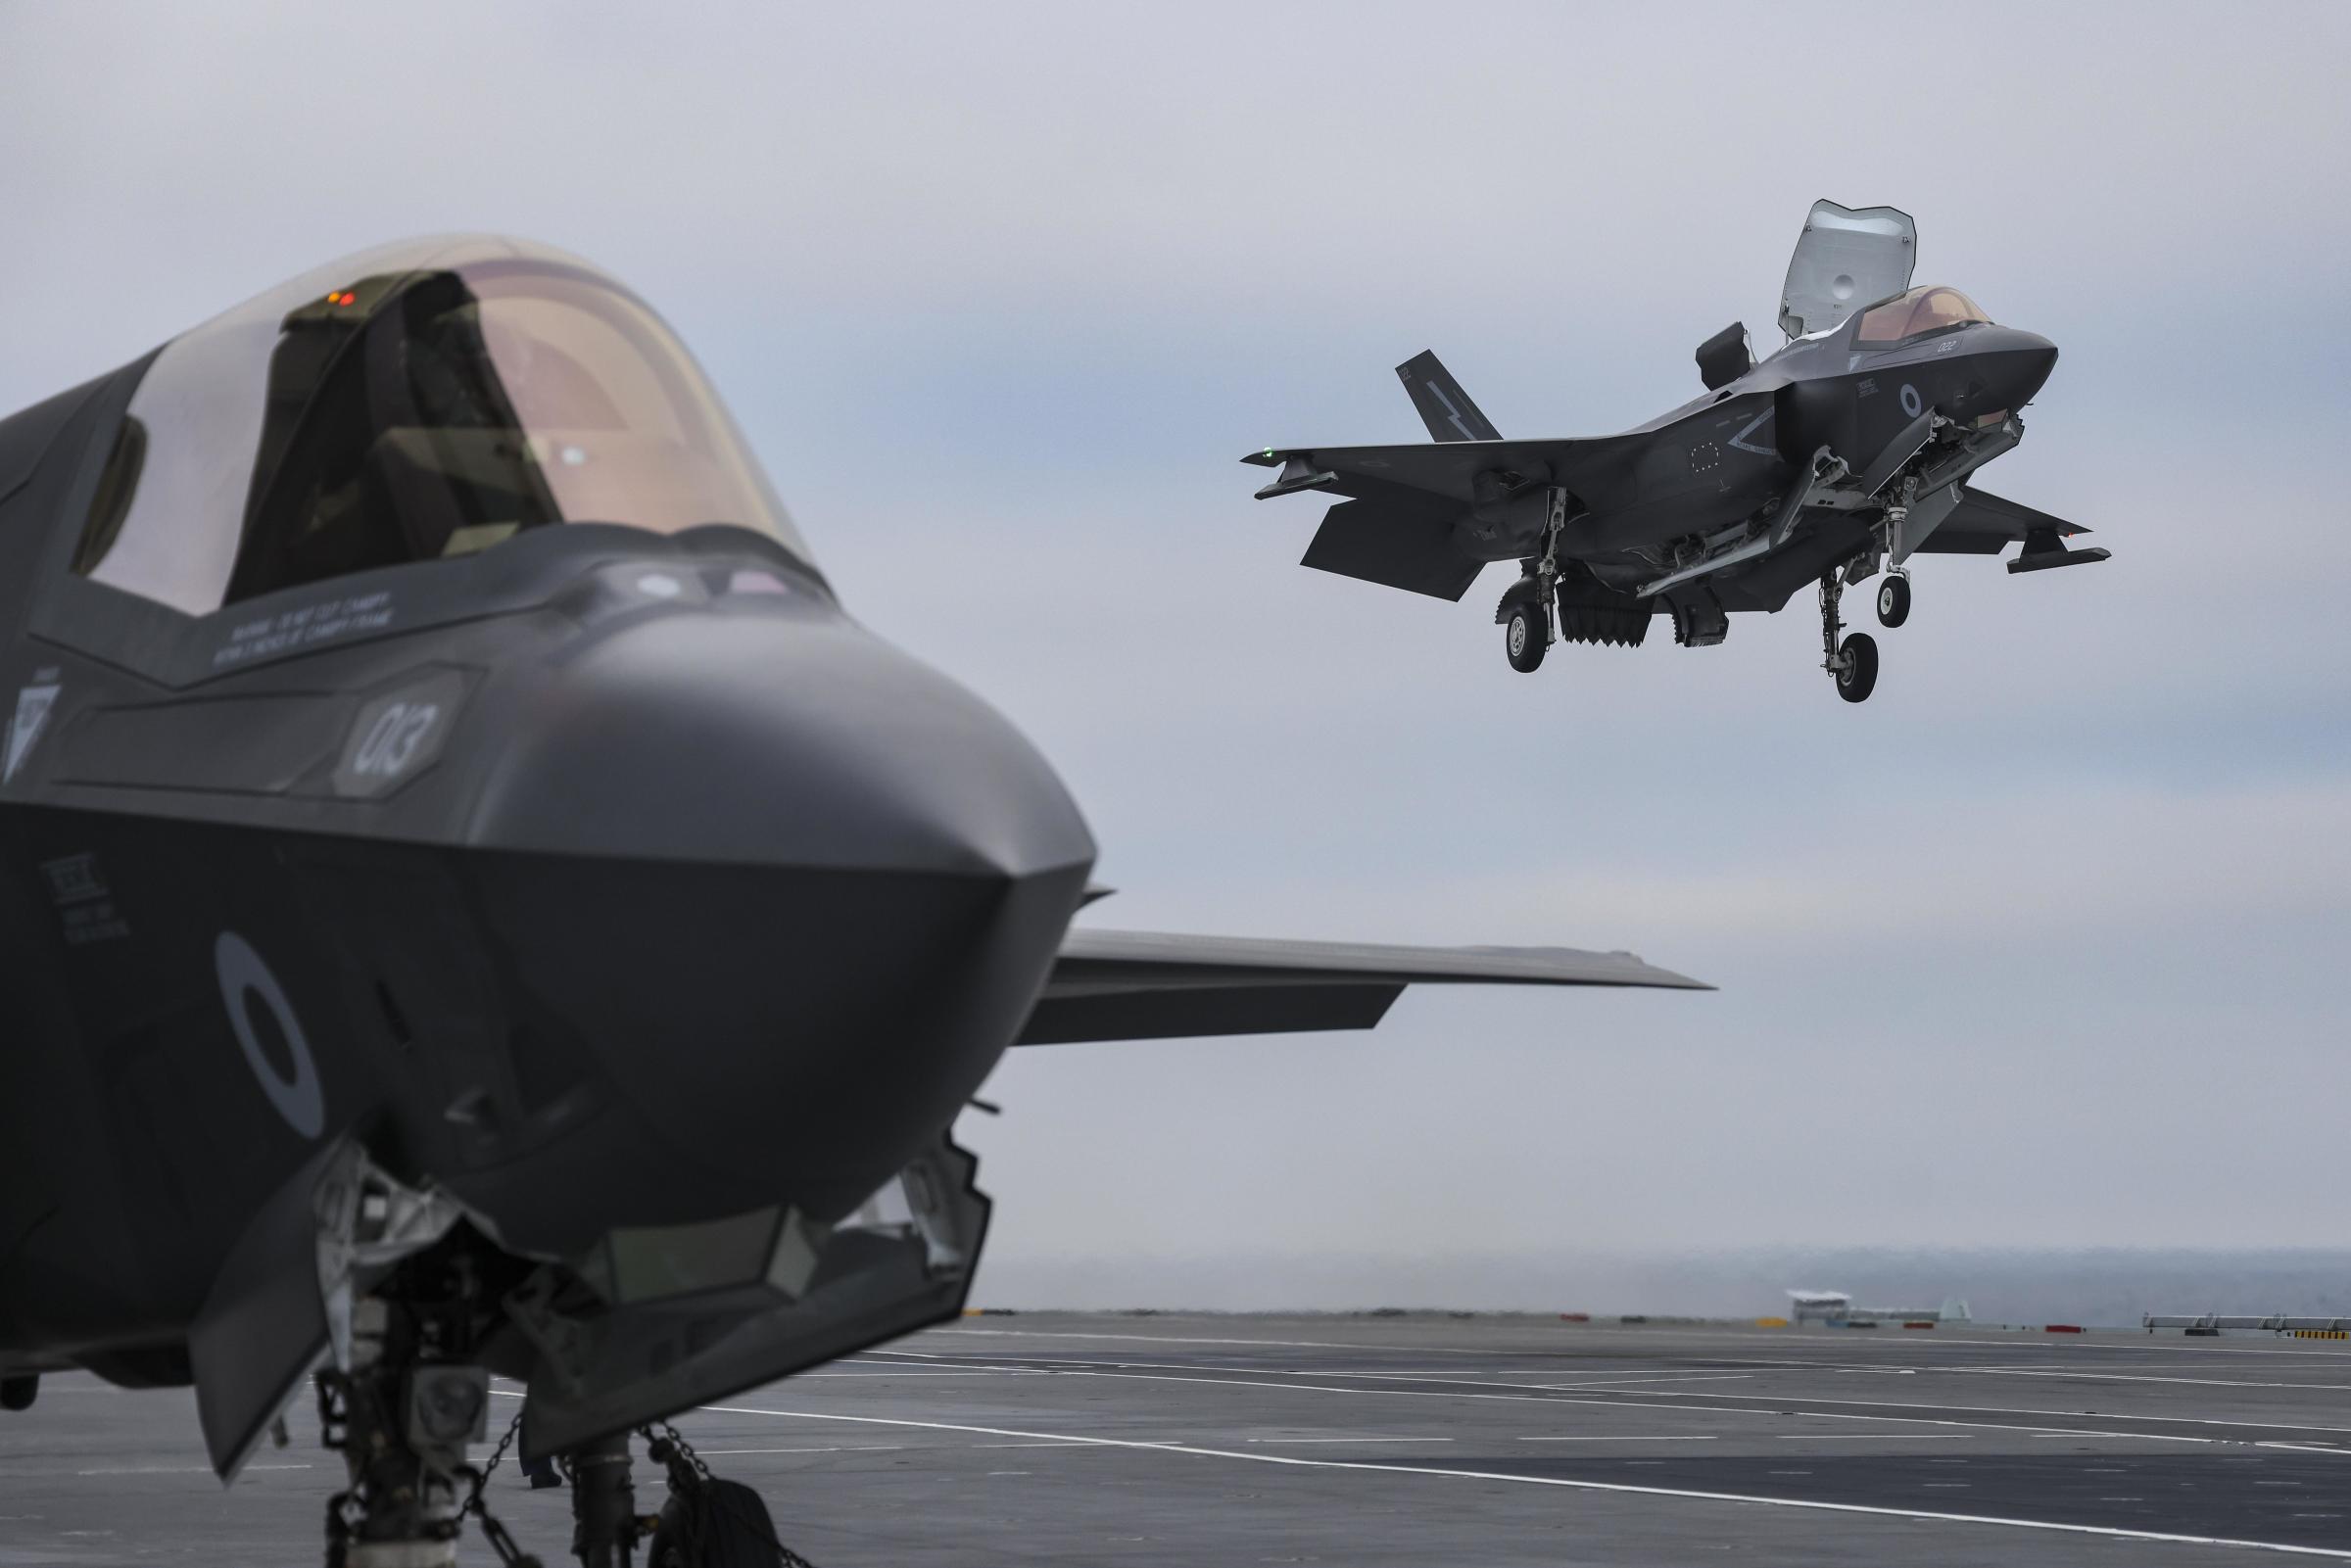 F35-B jets of 617 Squadron continue Carrier Qualifications on board HMS Queen Elizabeth